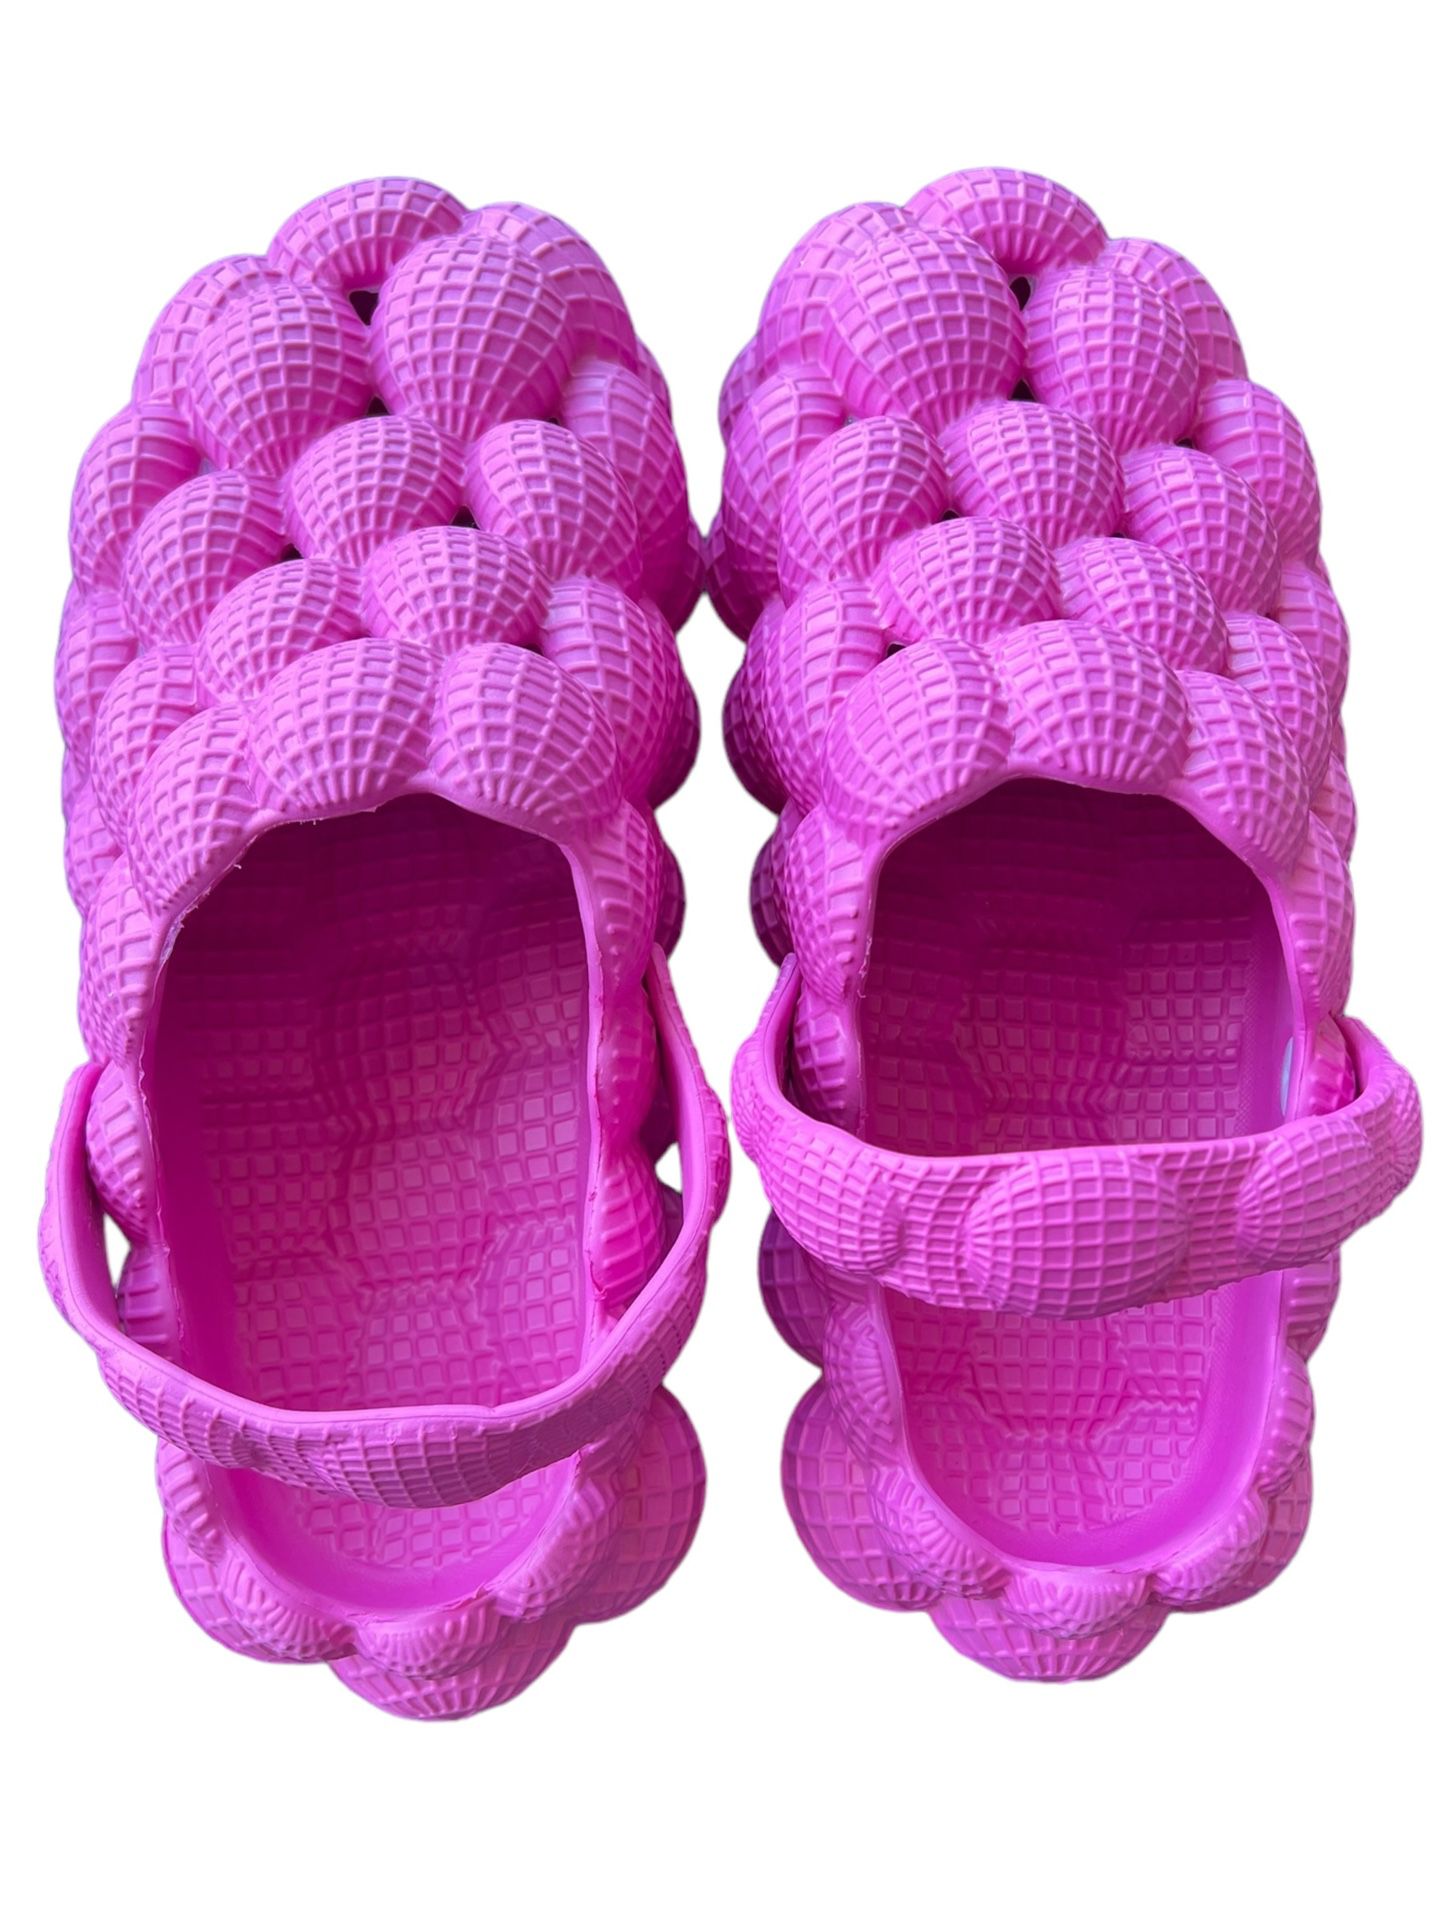 HOT PINK Bubble Slingback Slides Massage Slippers Funny Beach Shoes Men 10-11 These HOT PINK Bubble Slingback Slides are perfect for a day on the beac